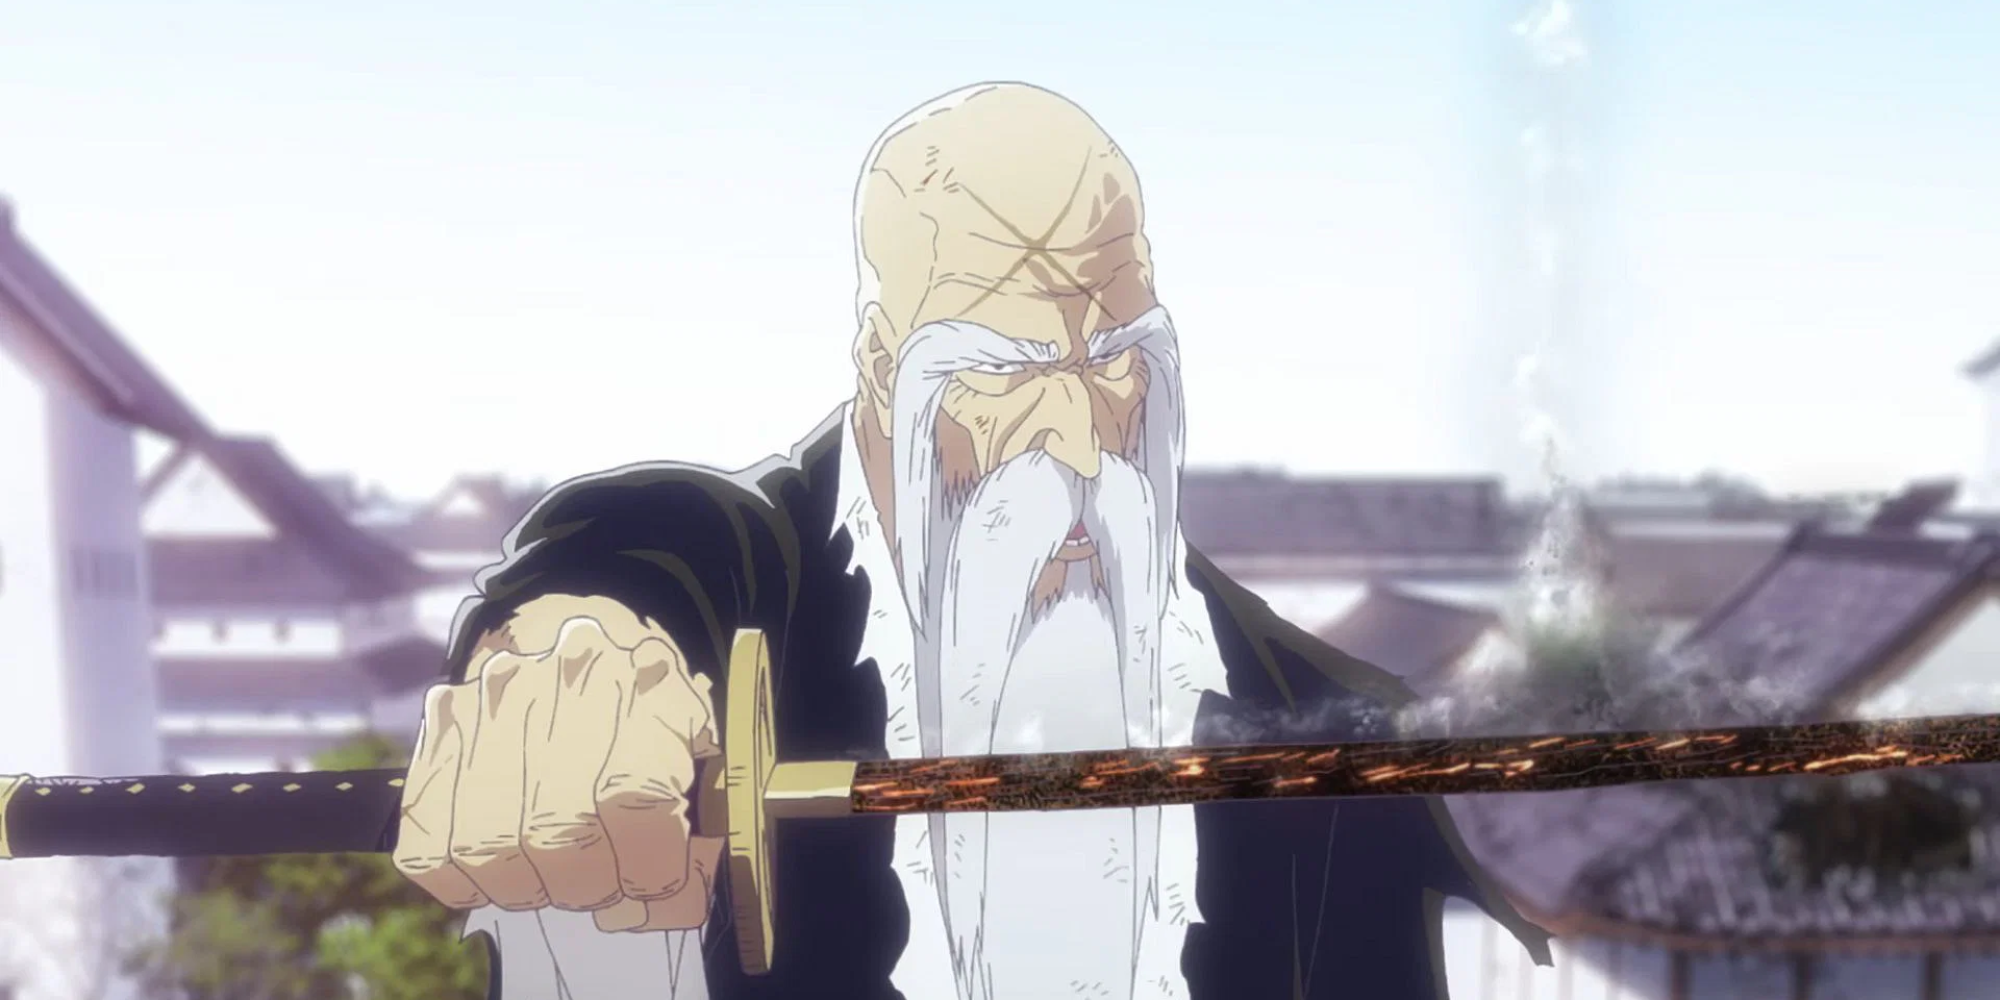 Yamamoto is one of the strongest old men in the anime world